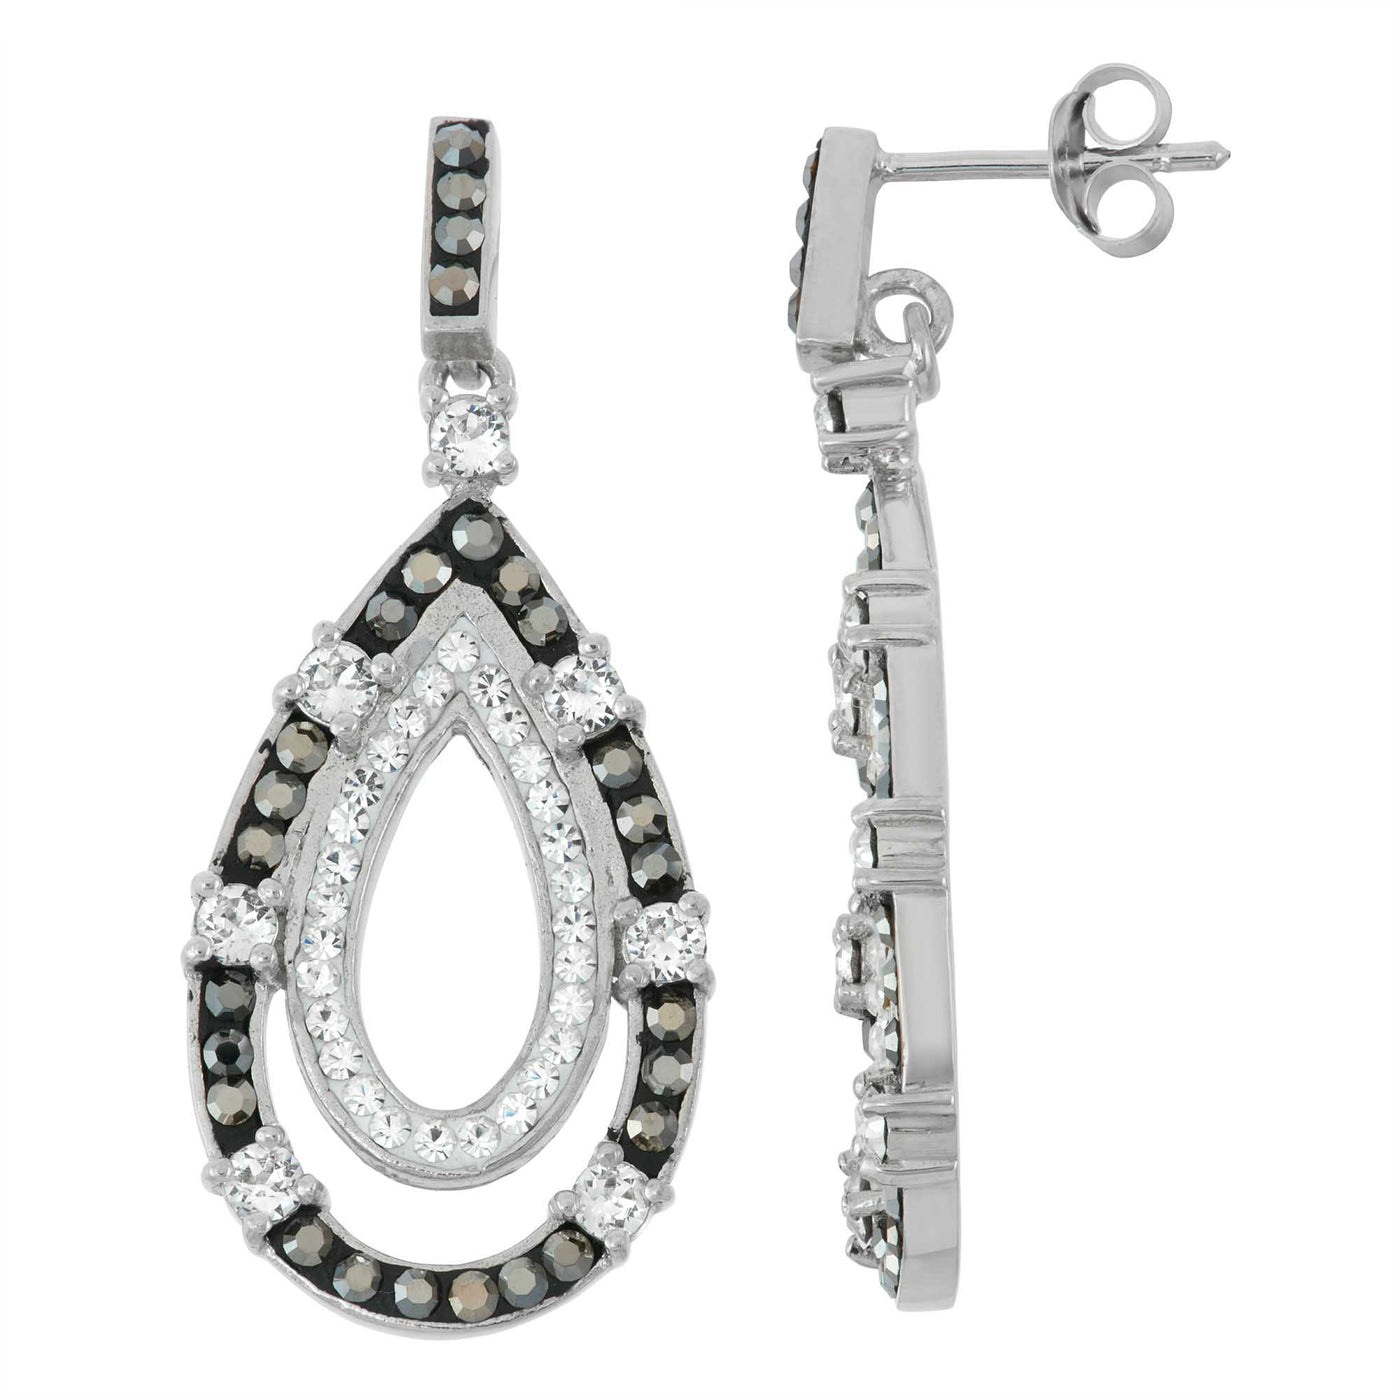 Rebecca Sloane Silver Earring Studded With White And Jet Crystals